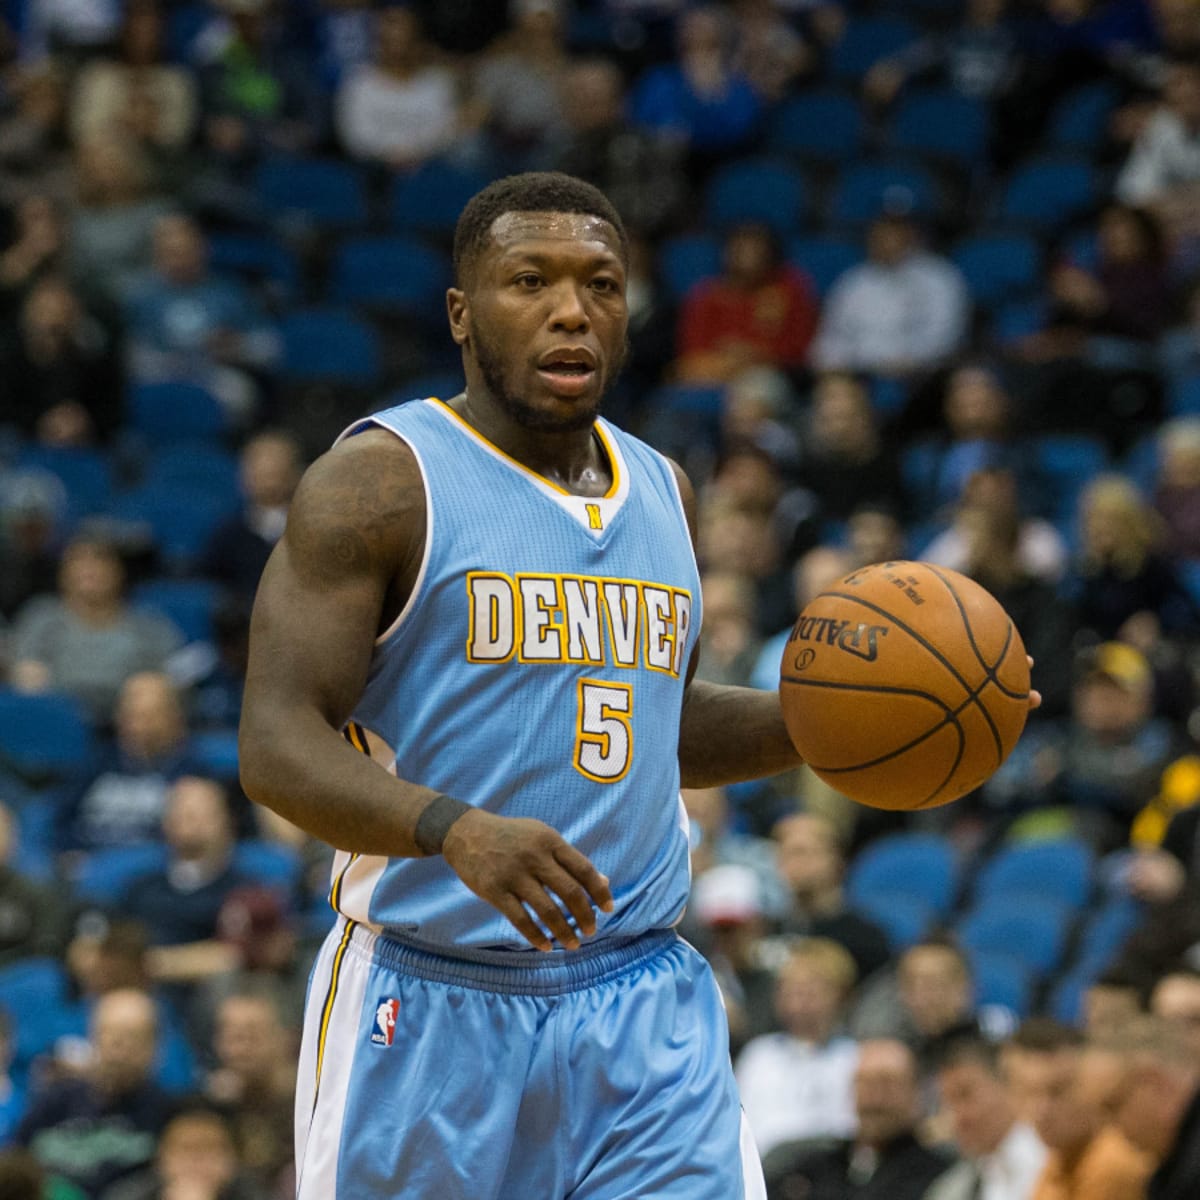 3-time dunk champion Nate Robinson undergoing treatment for kidney